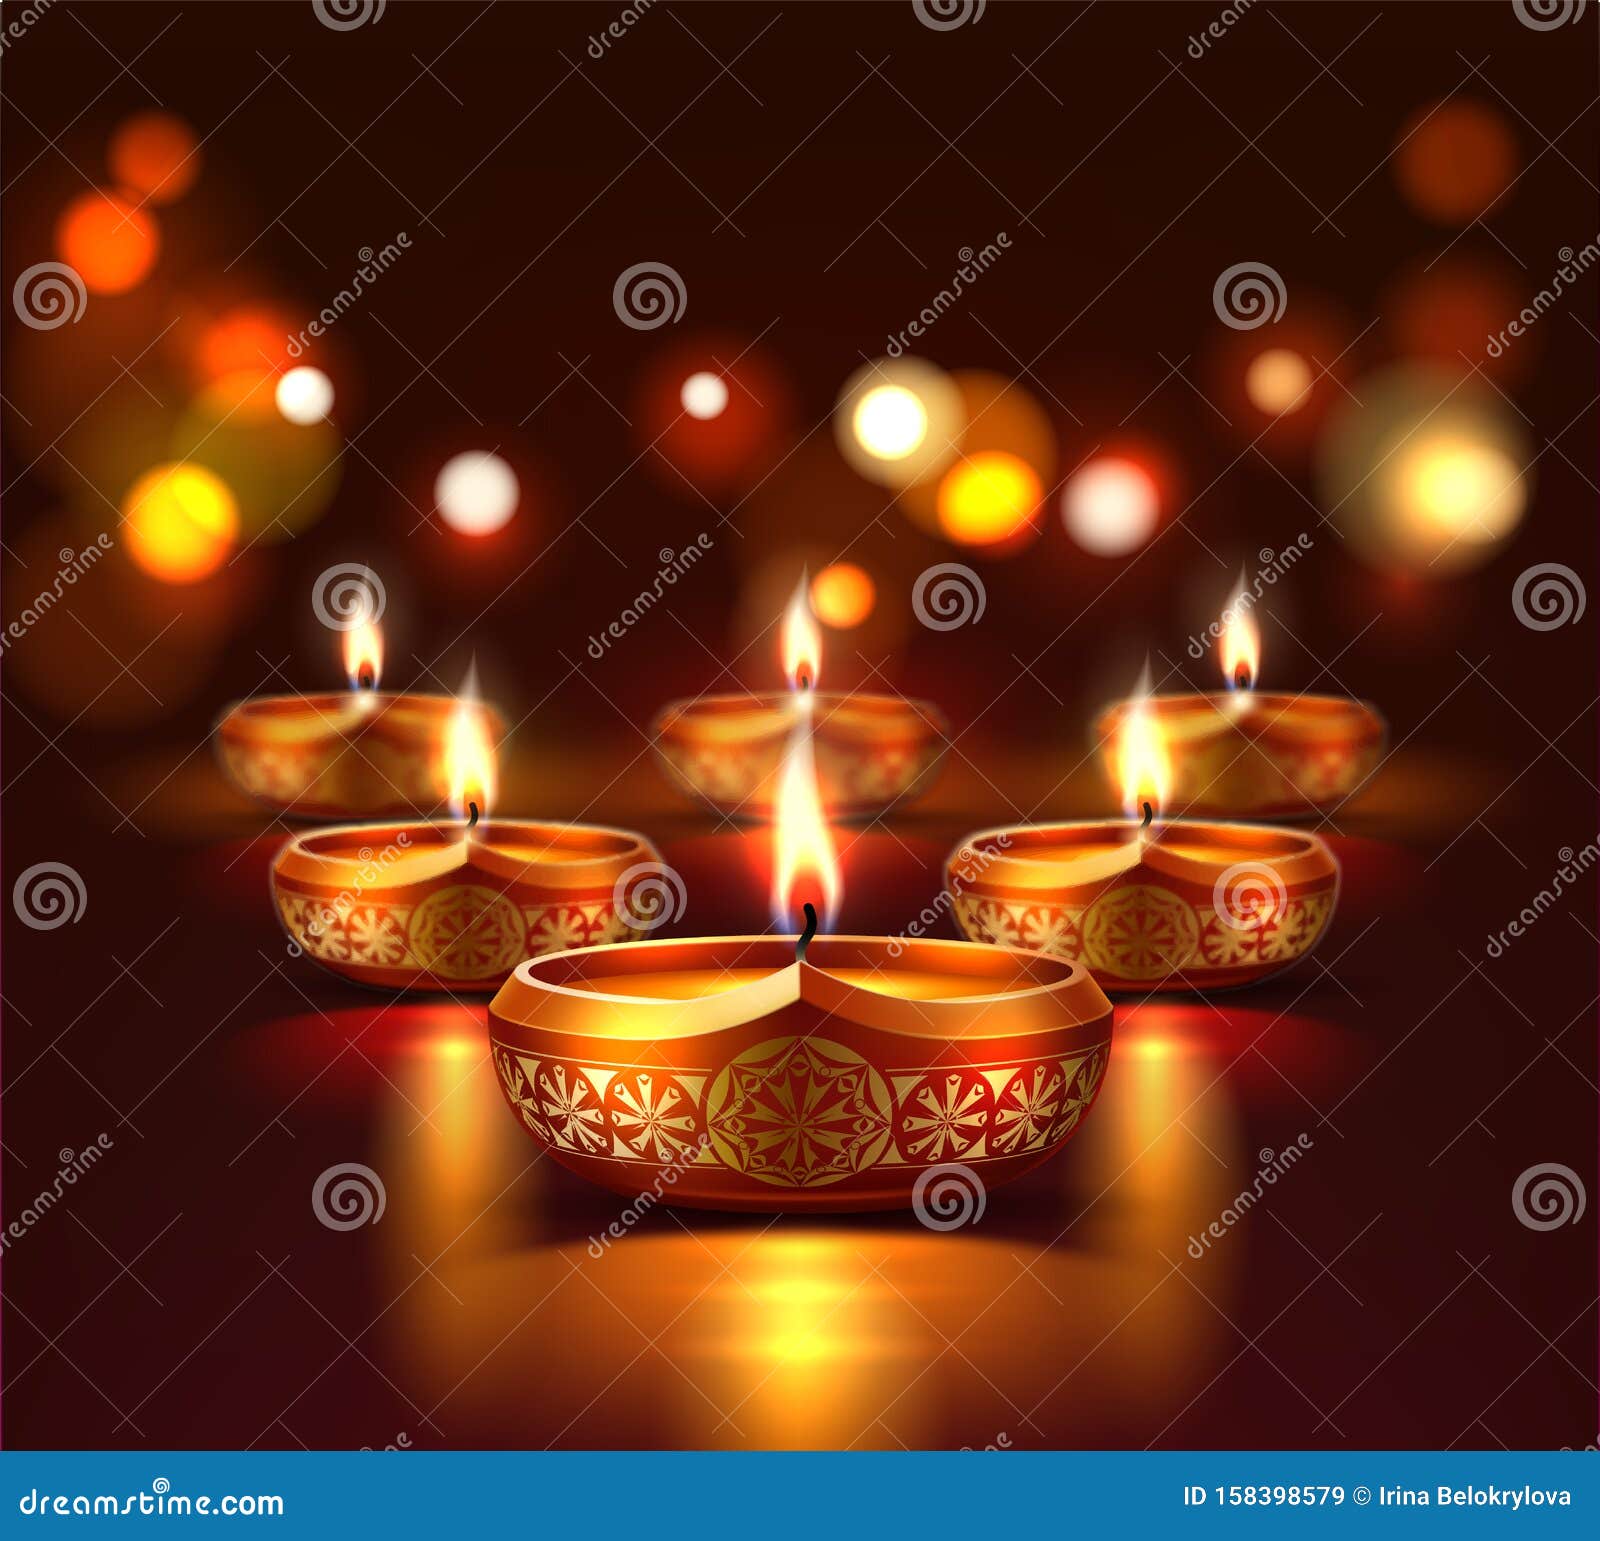 Vector Diwali Festival Poster with Diya Candles Stock Vector - Illustration  of ethnicity, holiday: 158398579